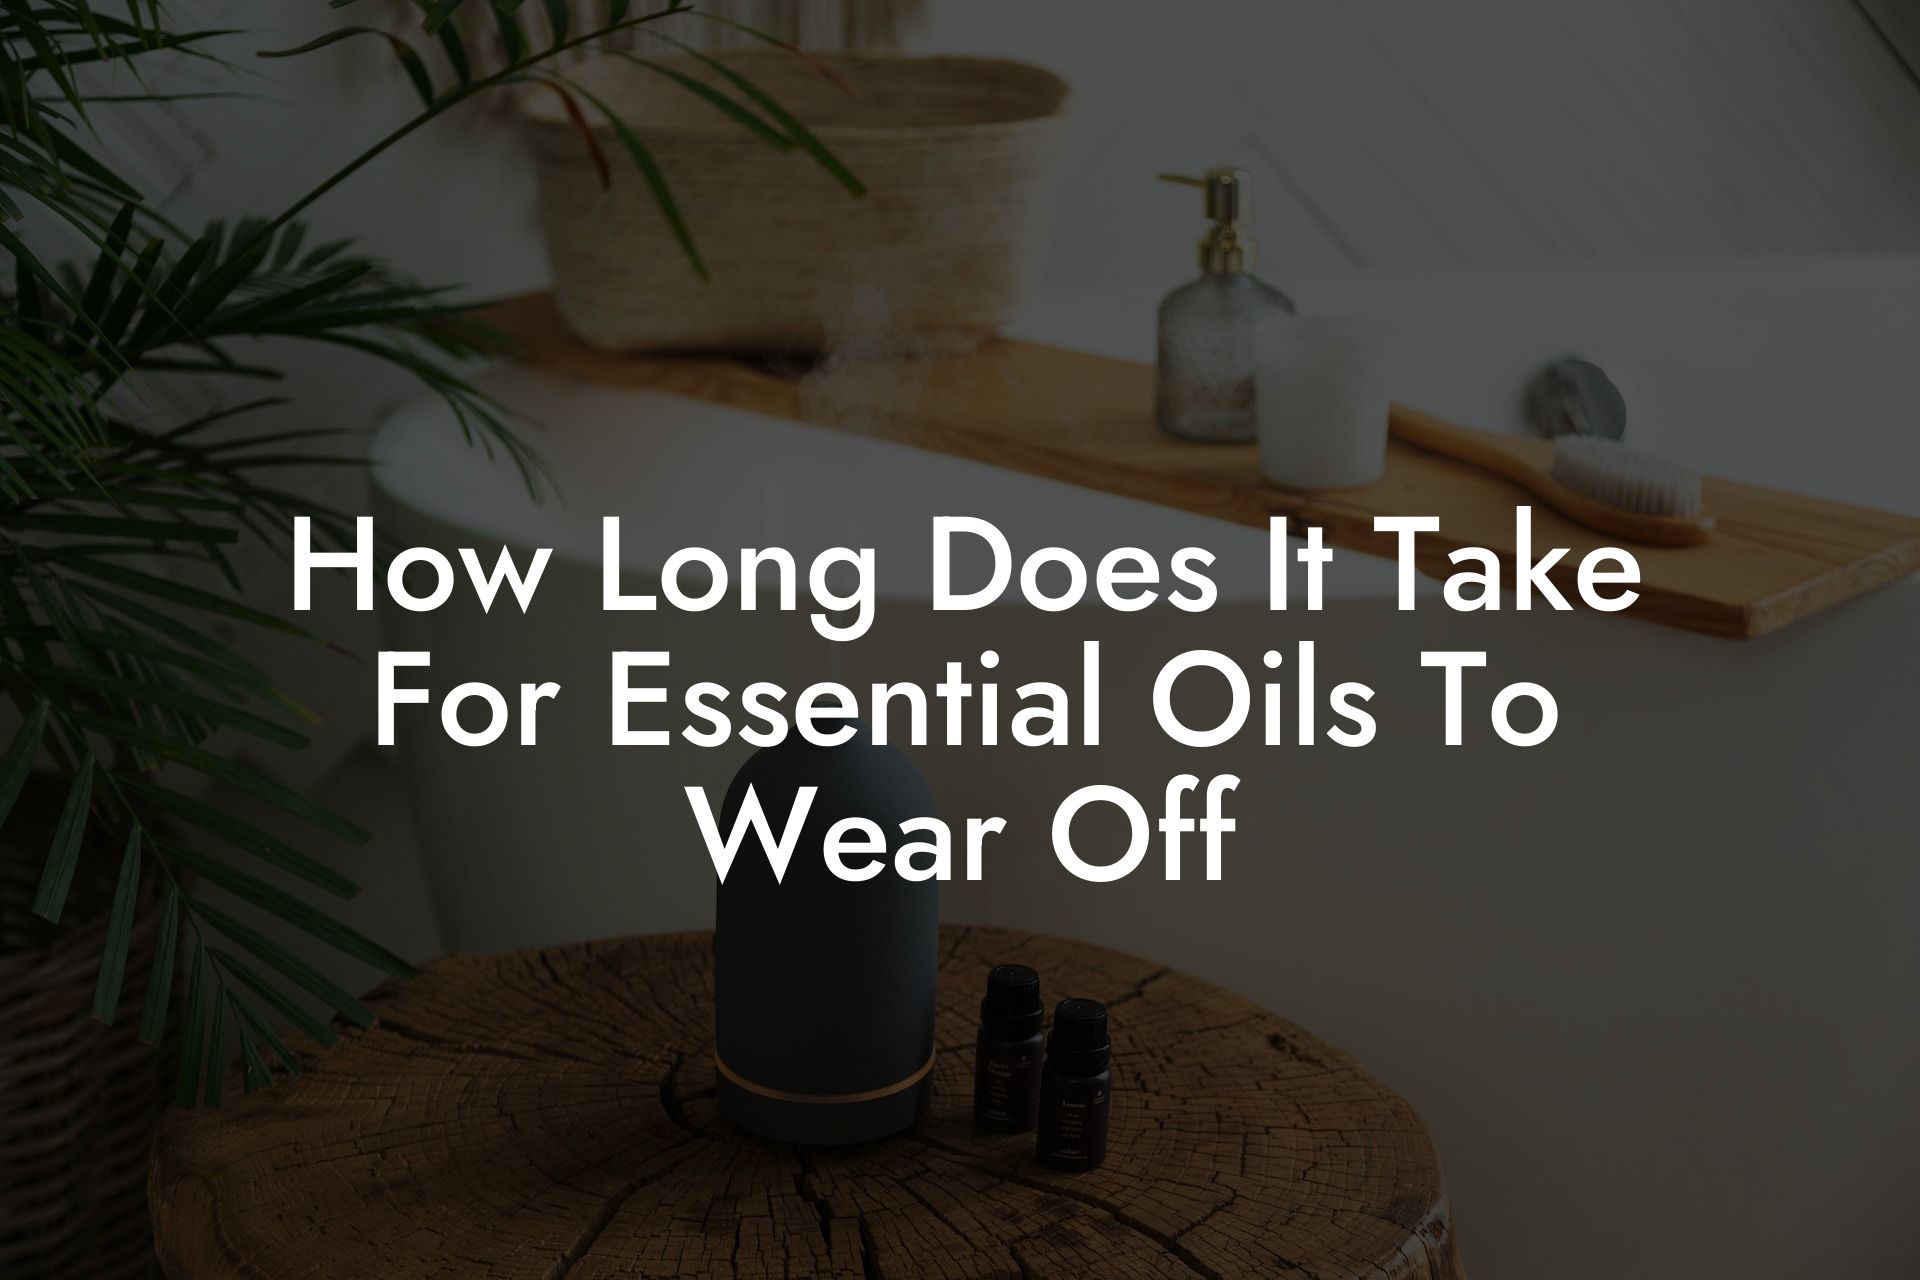 How Long Does It Take For Essential Oils To Wear Off